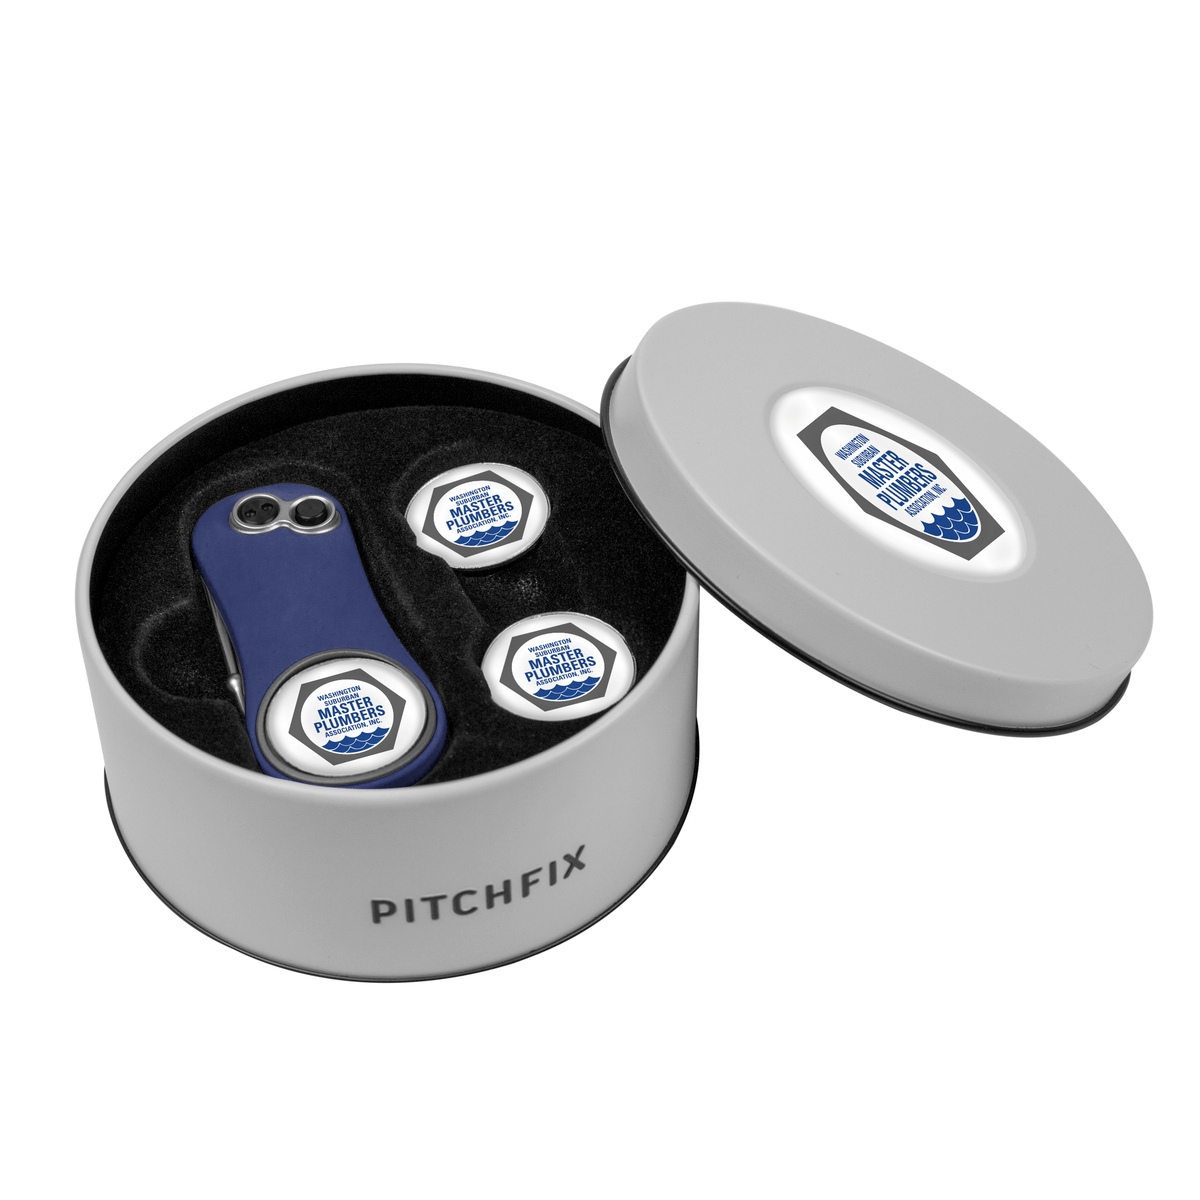 Pitchfix Accessories One Size / Royal Blue Pitchfix - Fusion 2.5 Golf Divot Tool Deluxe Gift Set